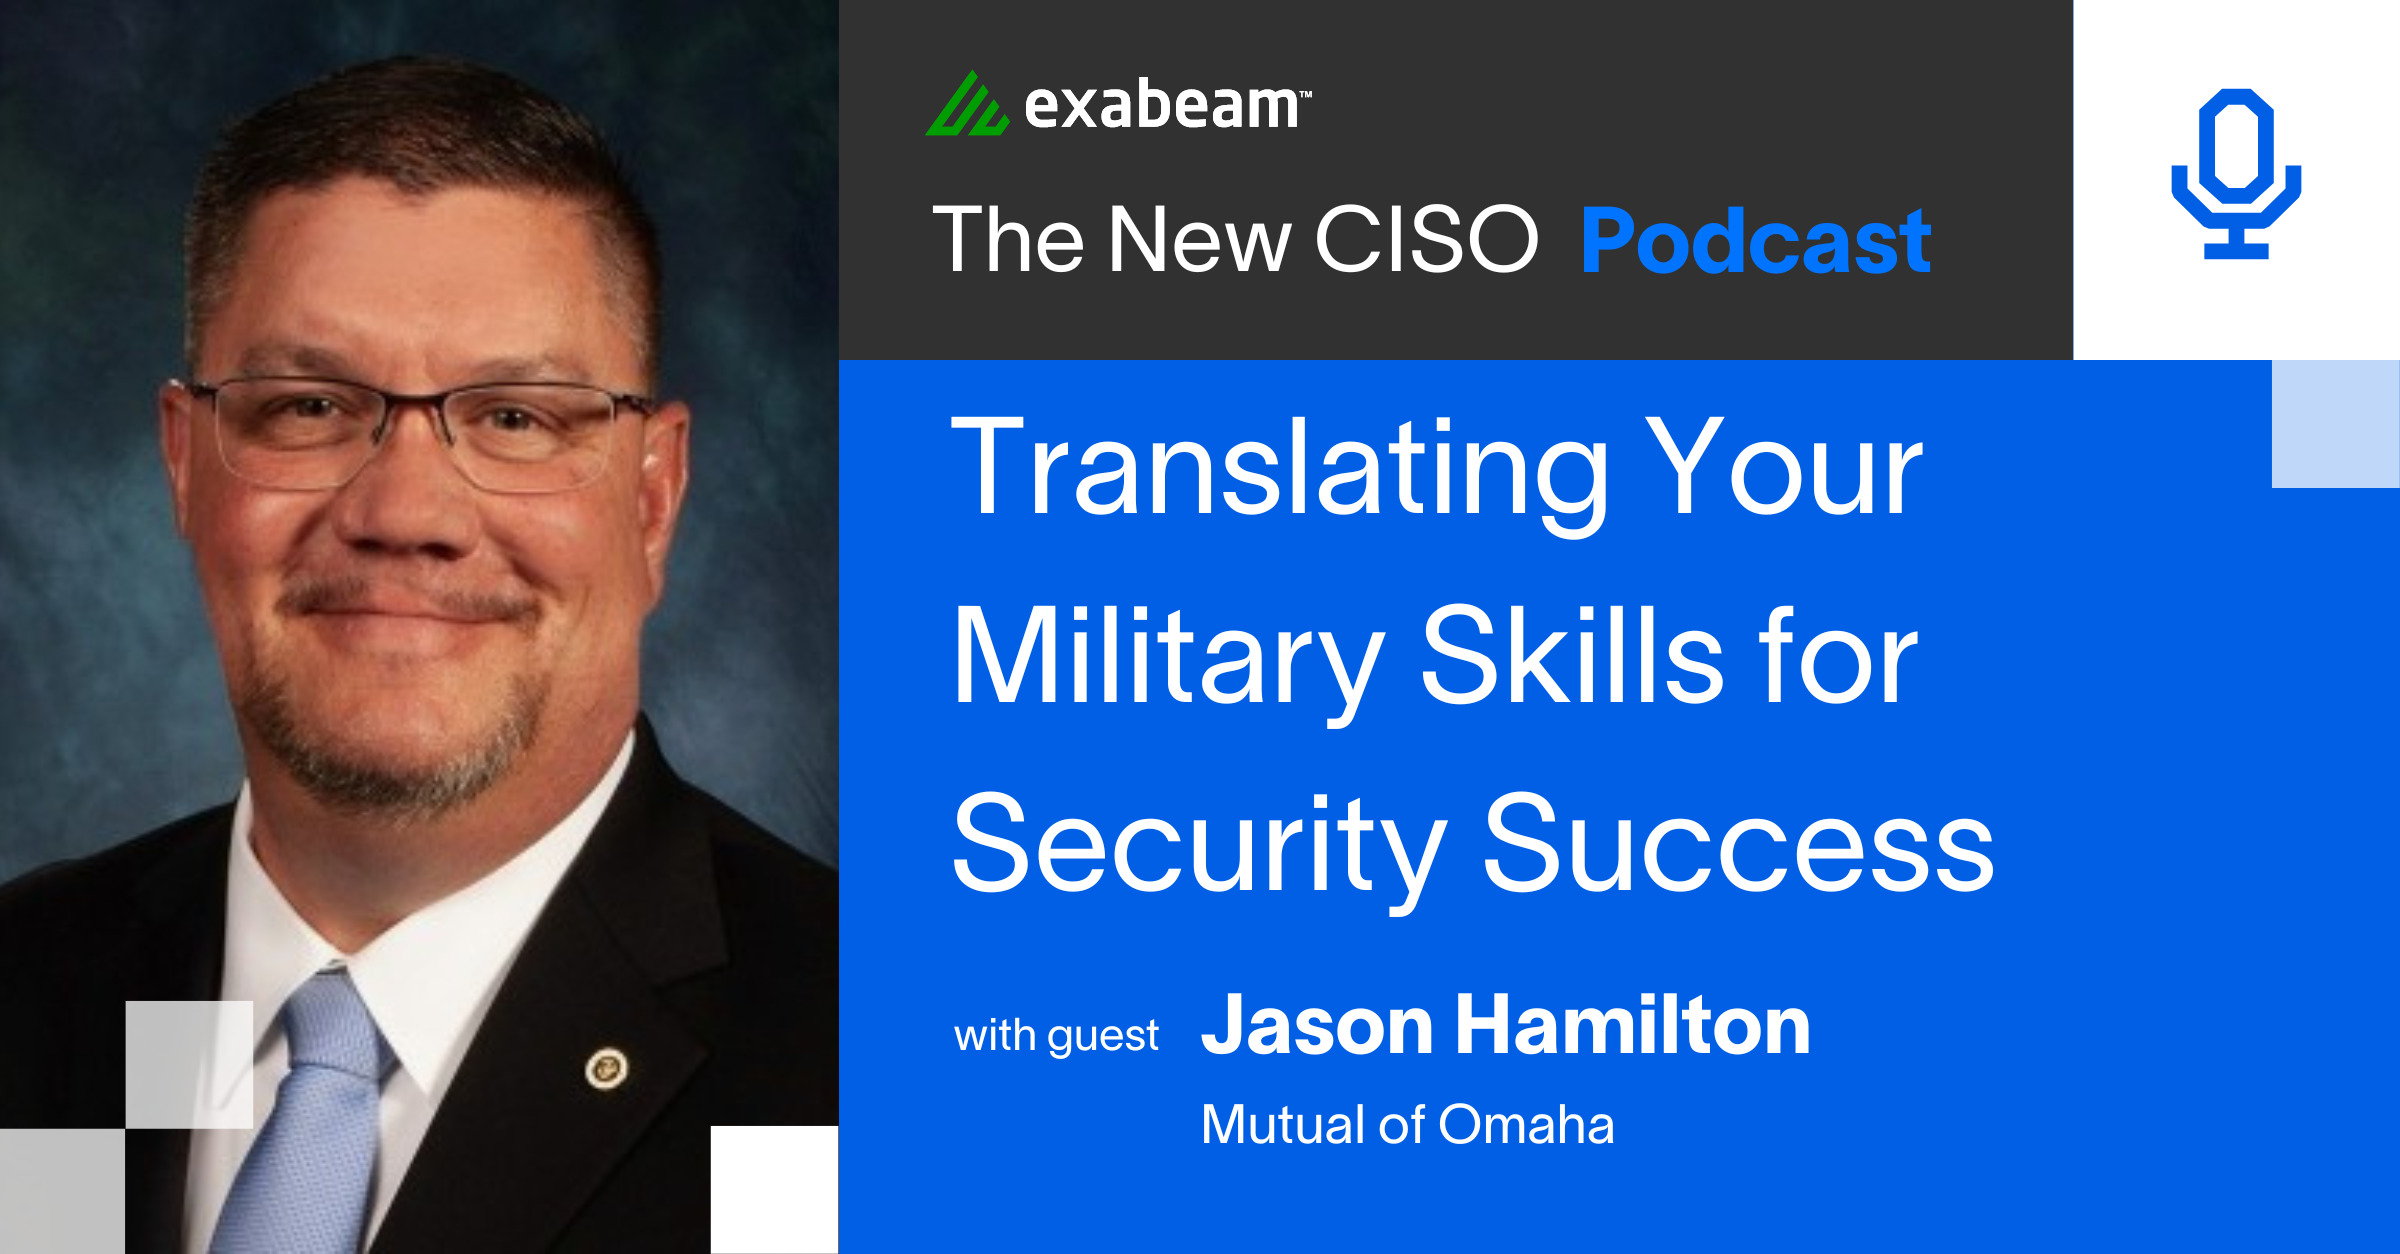 Translating Your Military Skills for Security Success" with Jason Hamilton